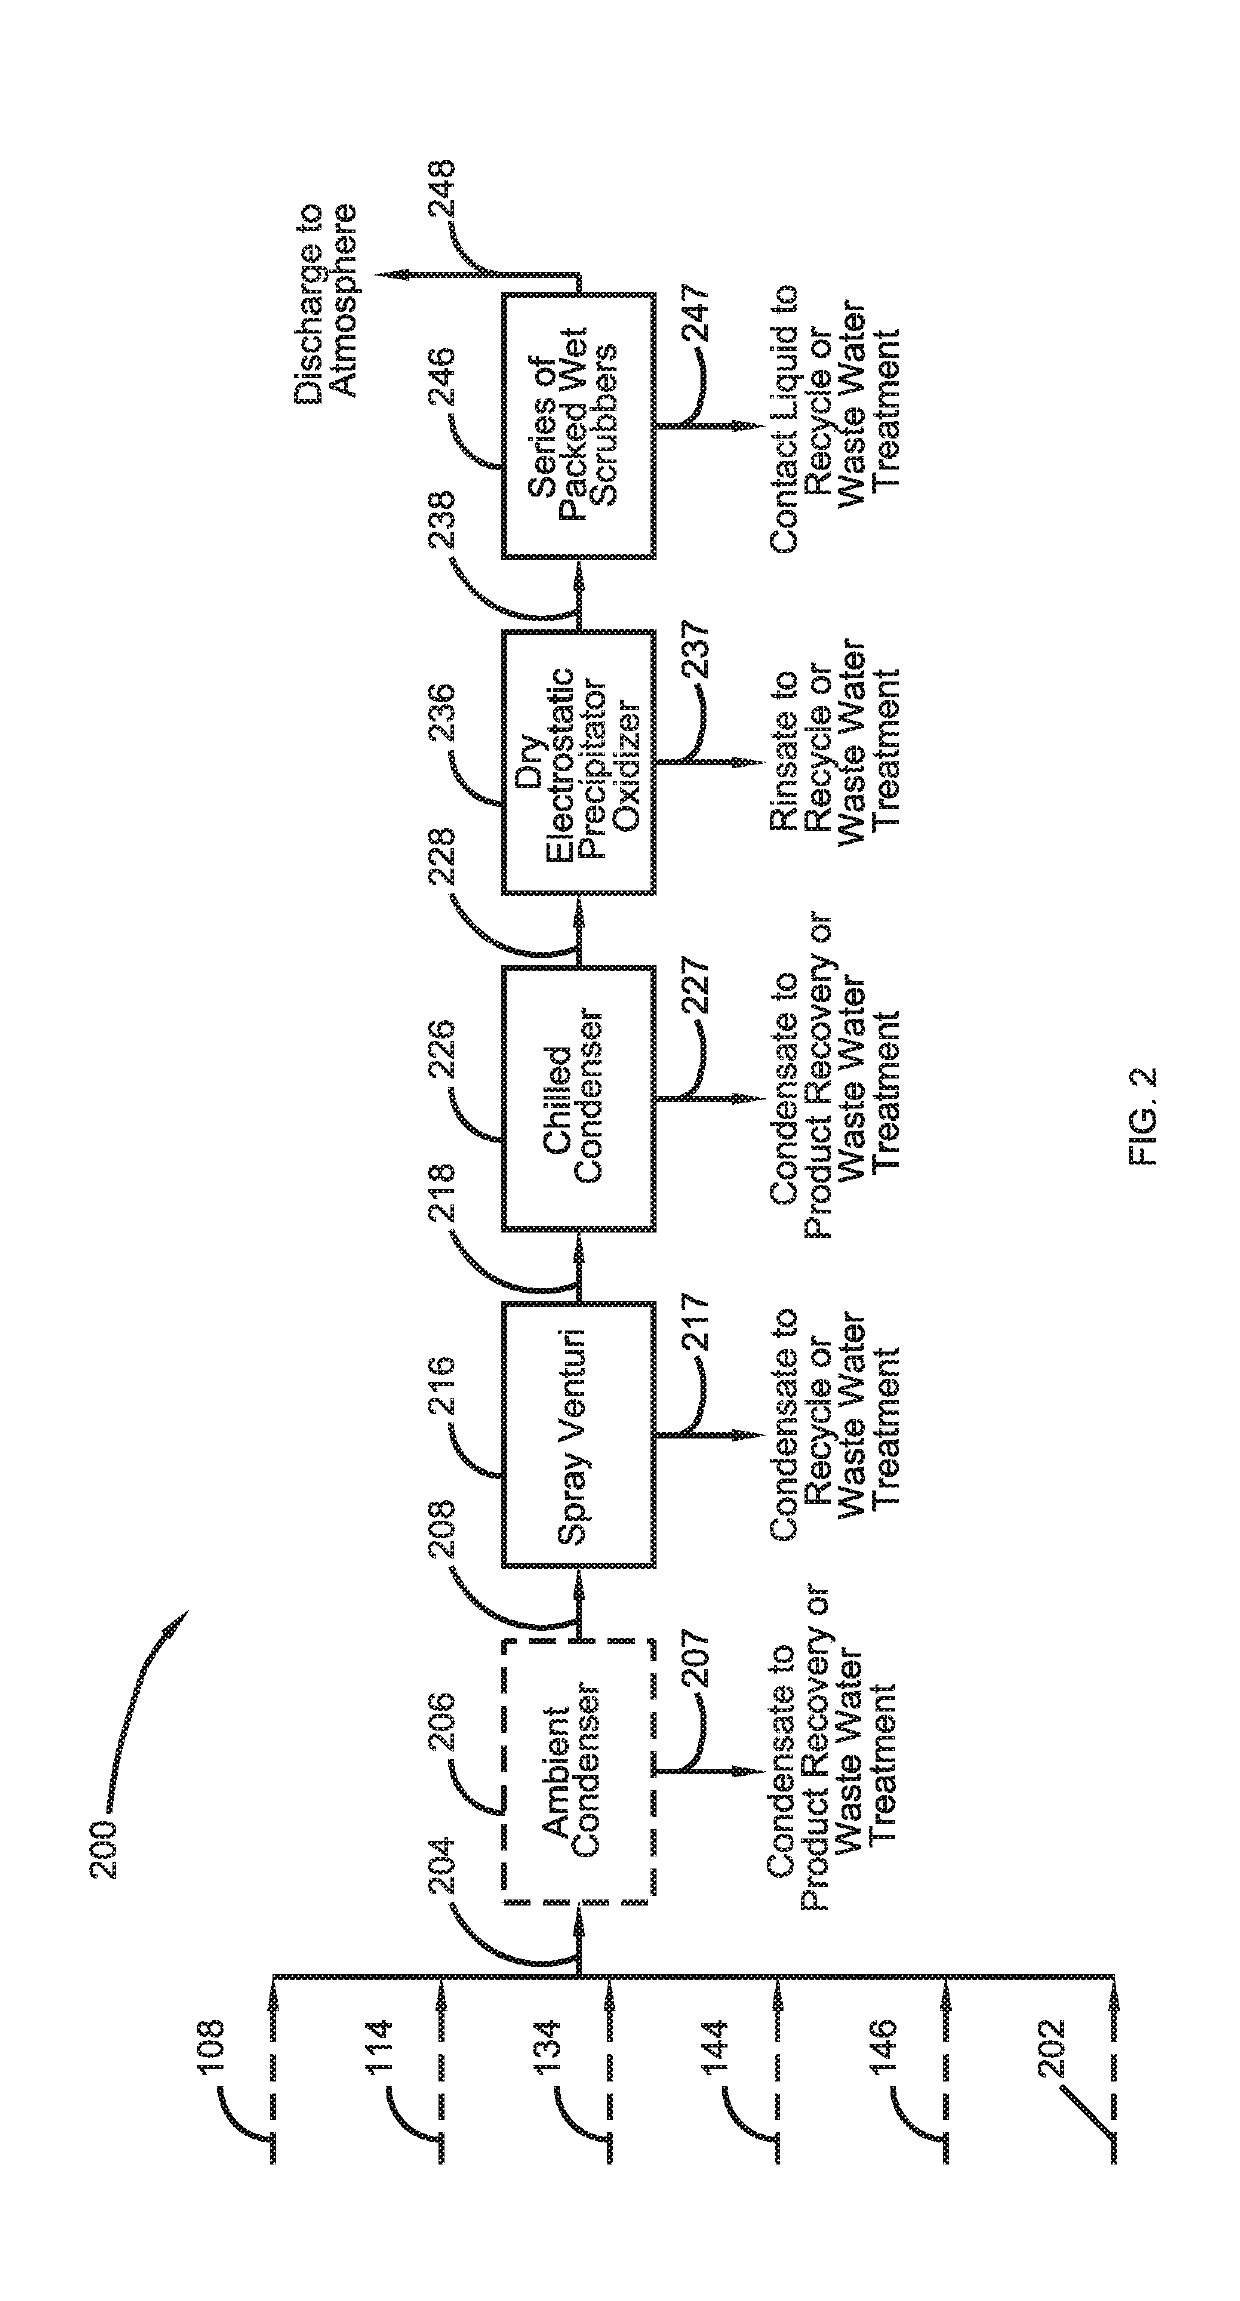 Methods and Equipment for Treatment of Odorous Gas Streams